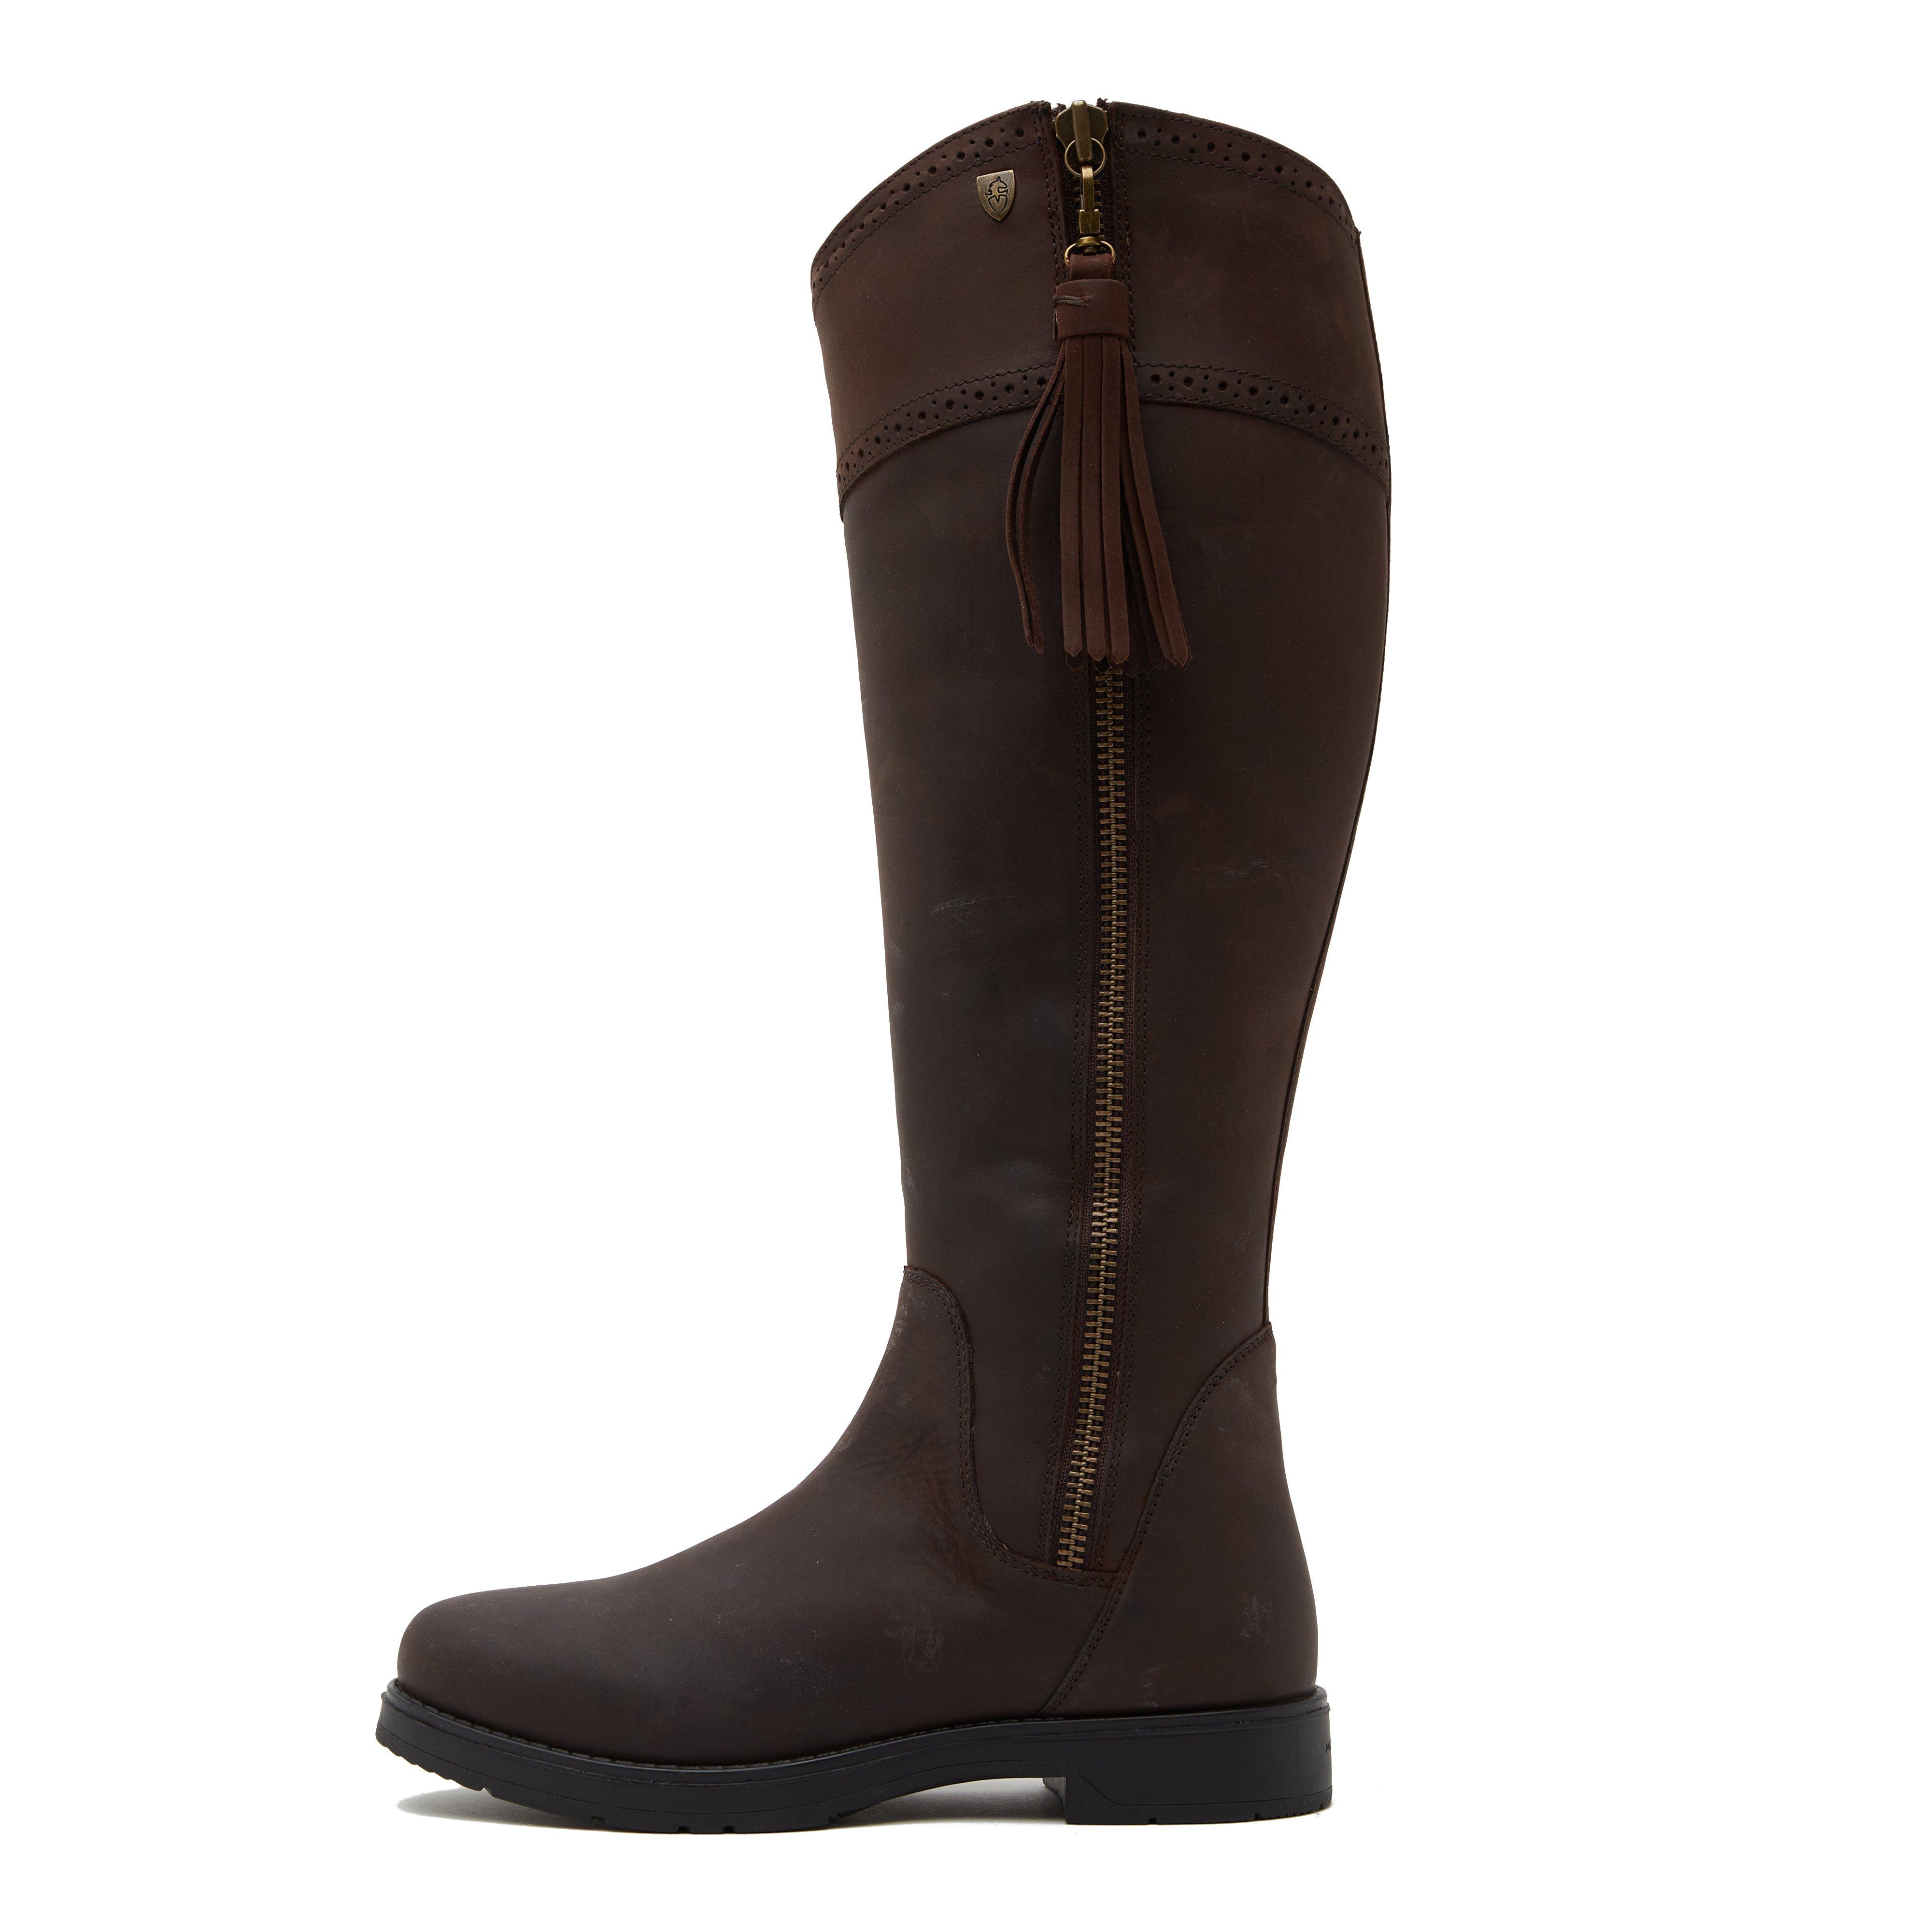 Womens Alessandro Boots Chocolate